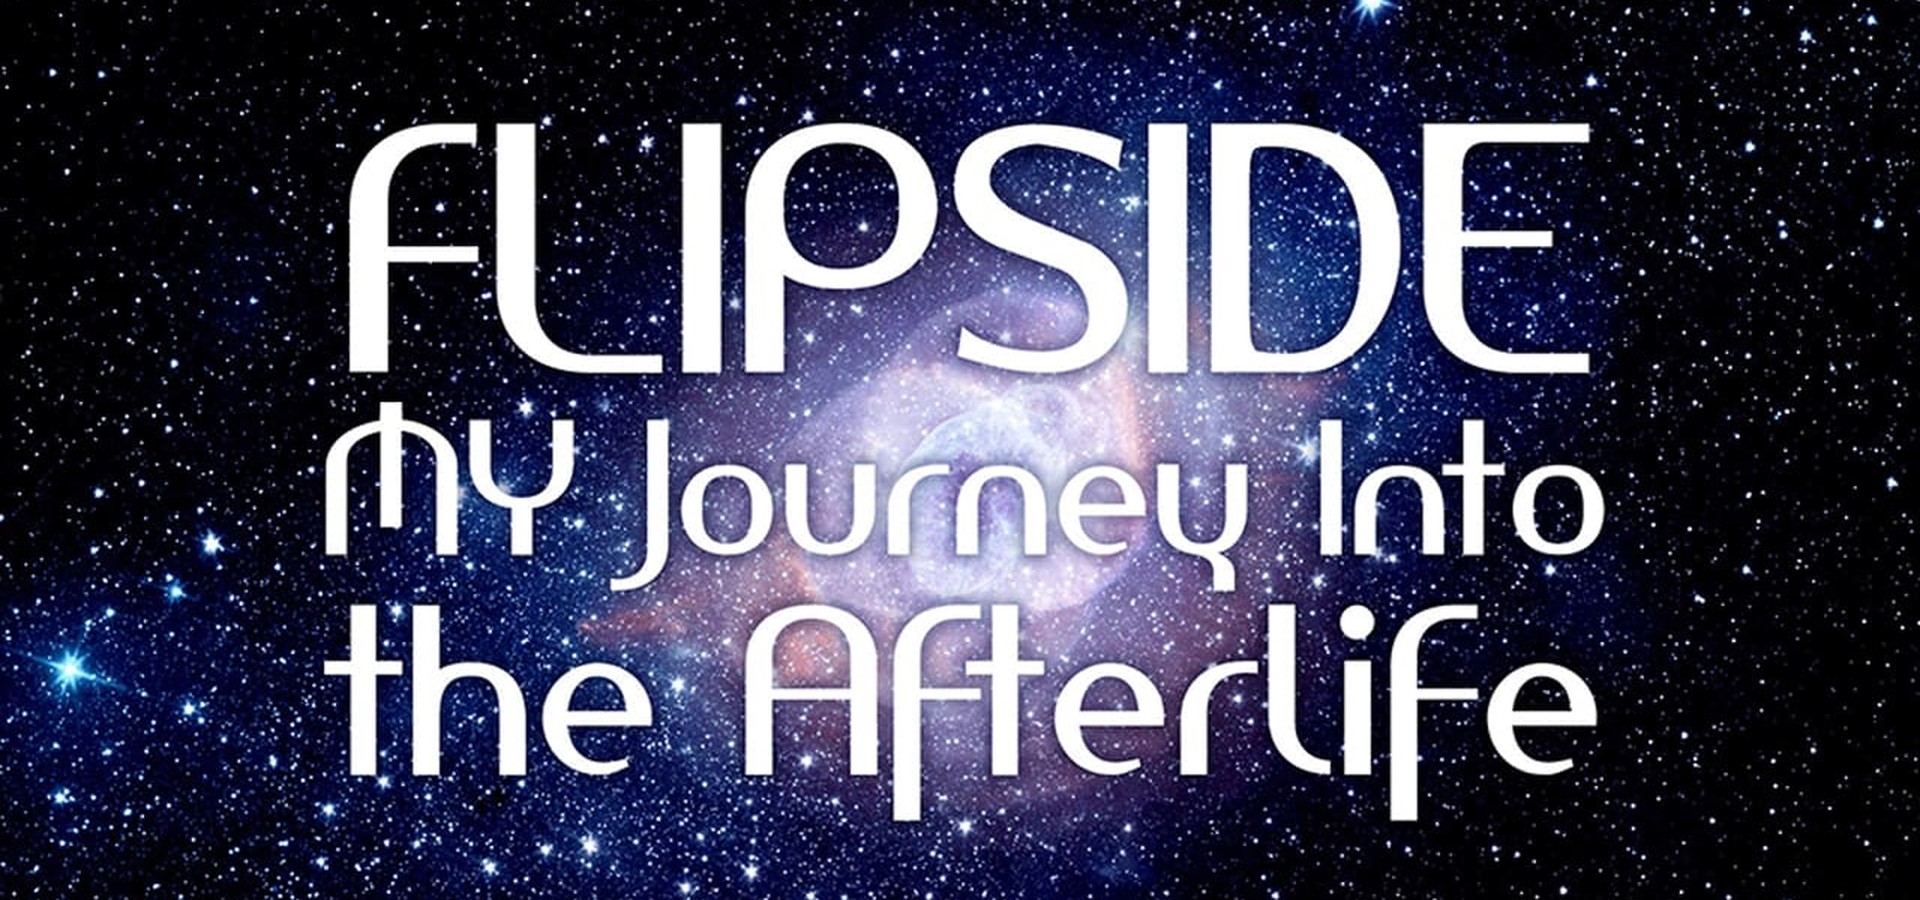 Flipside: A Journey Into the Afterlife